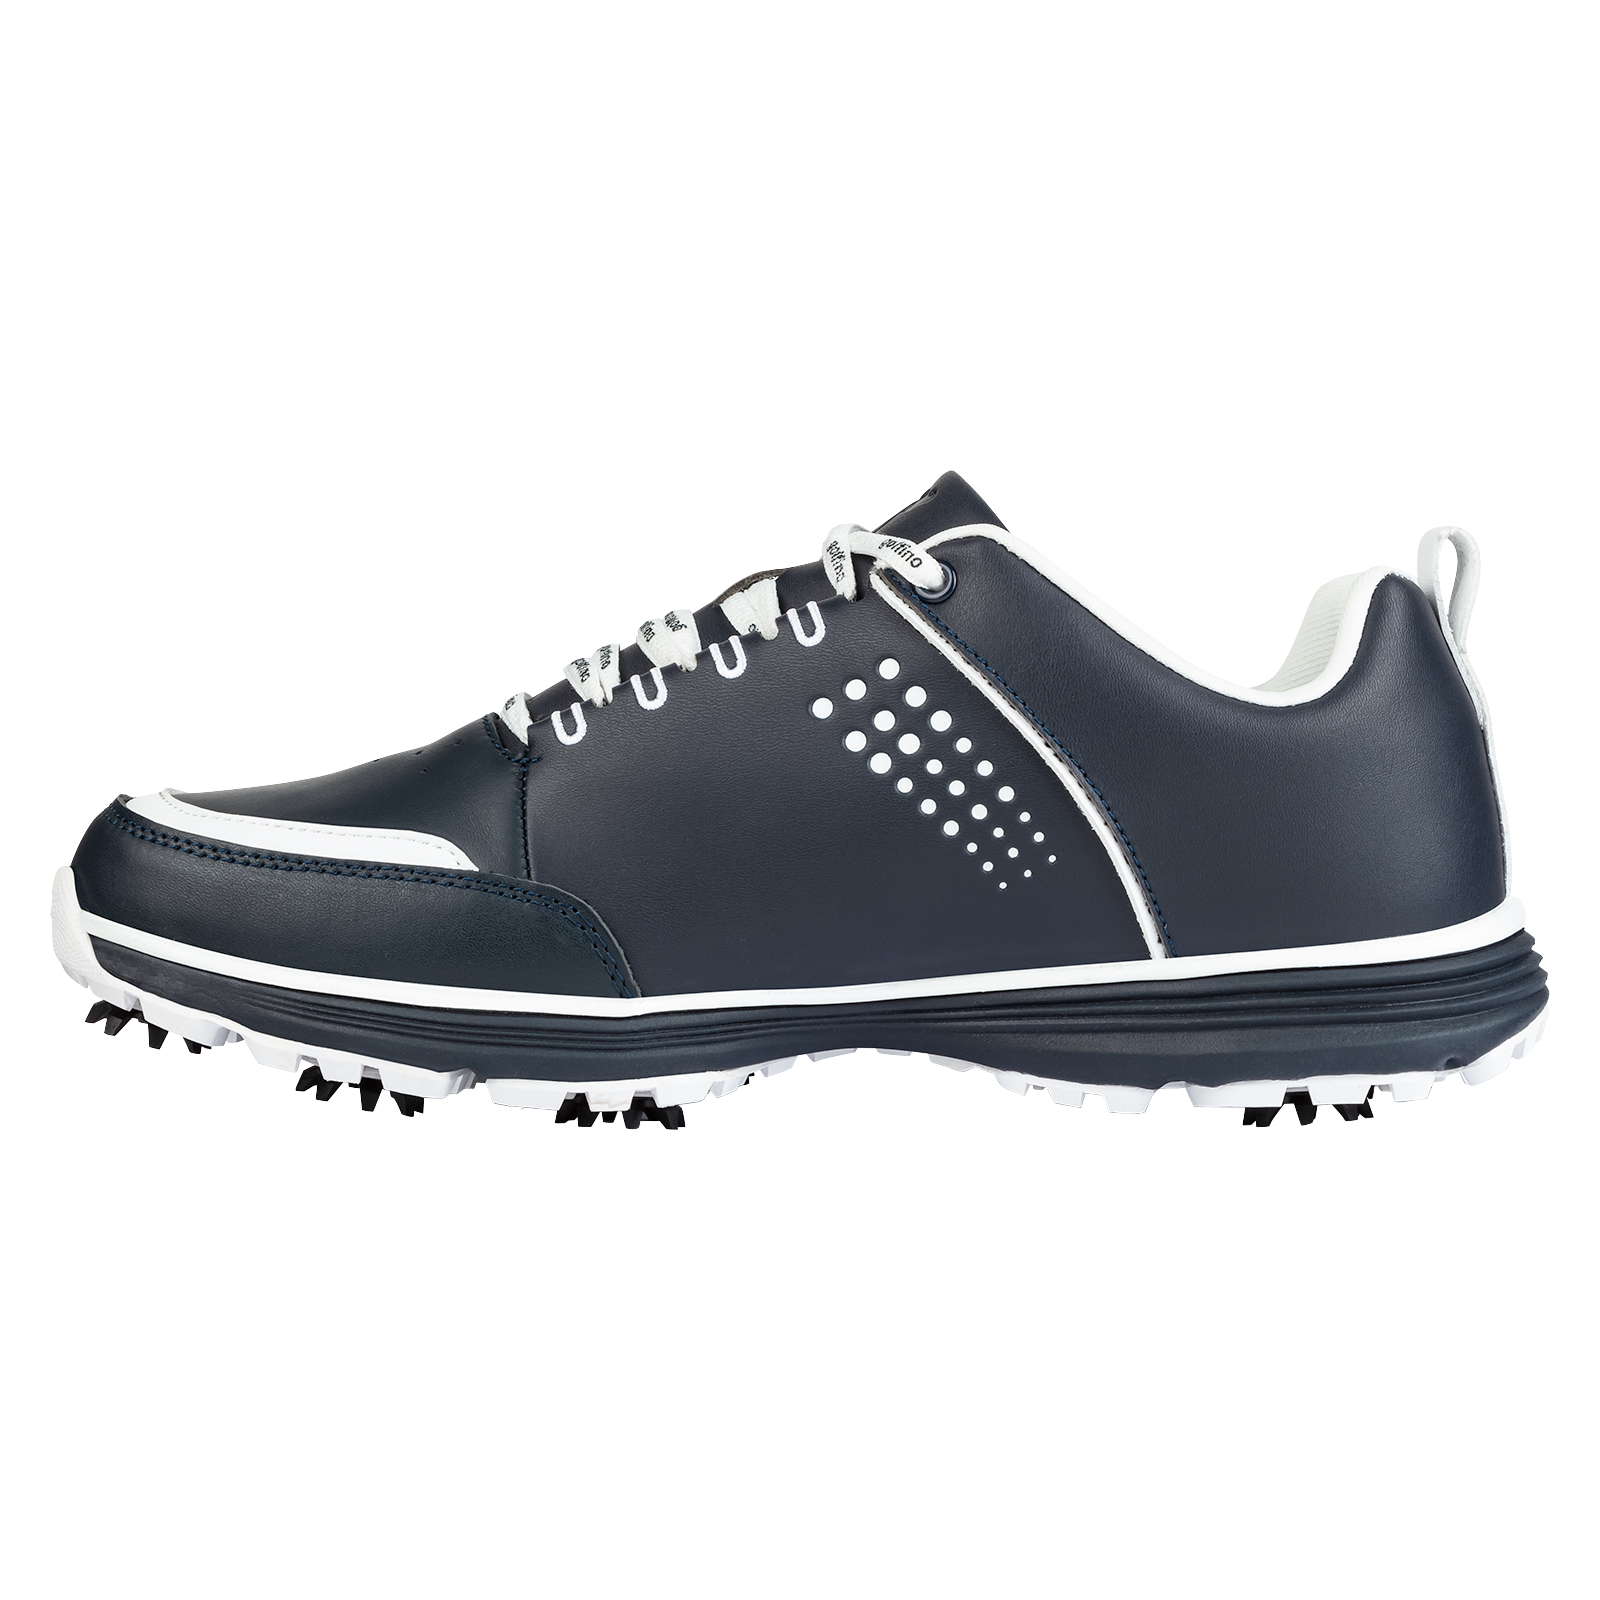 Men's genuine leather golf shoes with spikes in a modern design